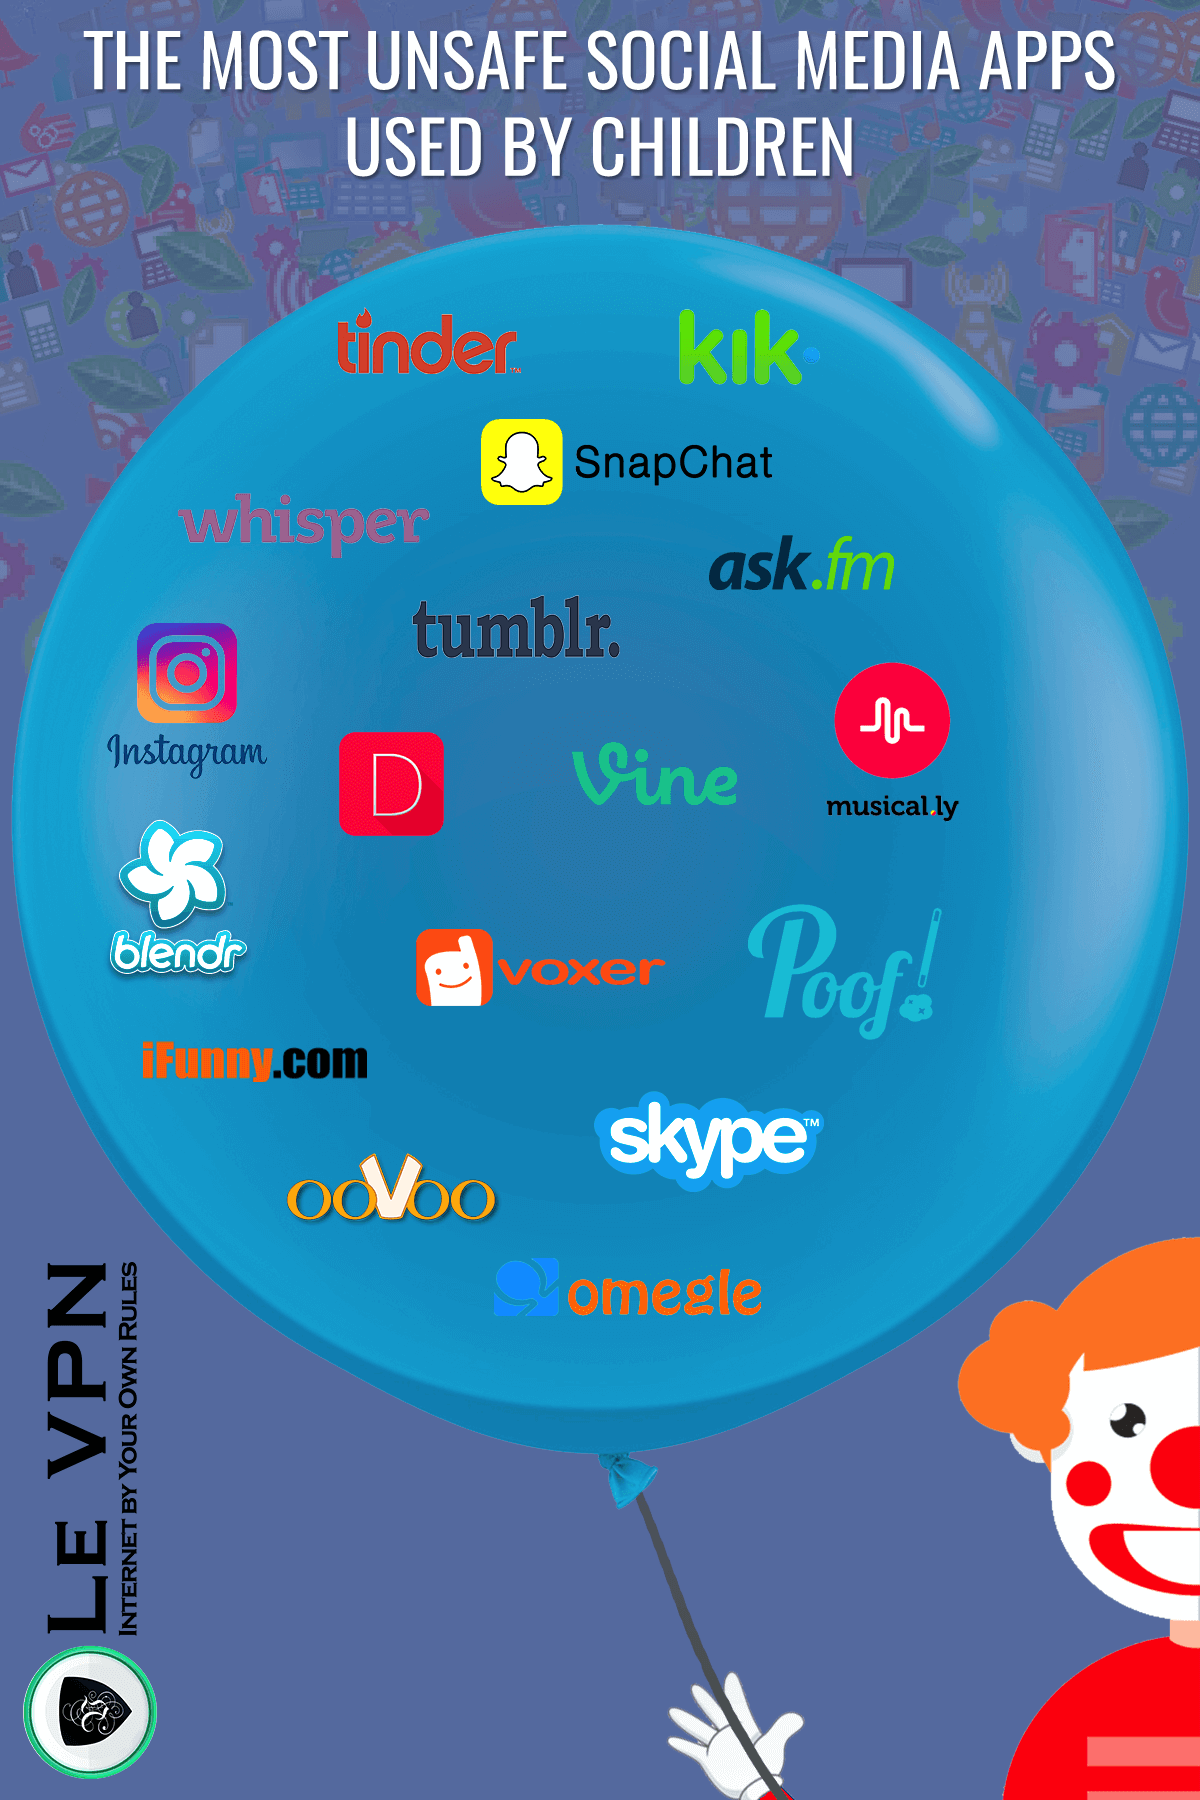 The Most Unsafe Social Media Apps For Children | The Most Dangerous Social Media Apps Children Are Using | apps for parents to monitor unsafe apps for kids | dangerous apps for children | inappropriate apps for teens | social media app parental guidance | most unsafe social media apps | Le VPN